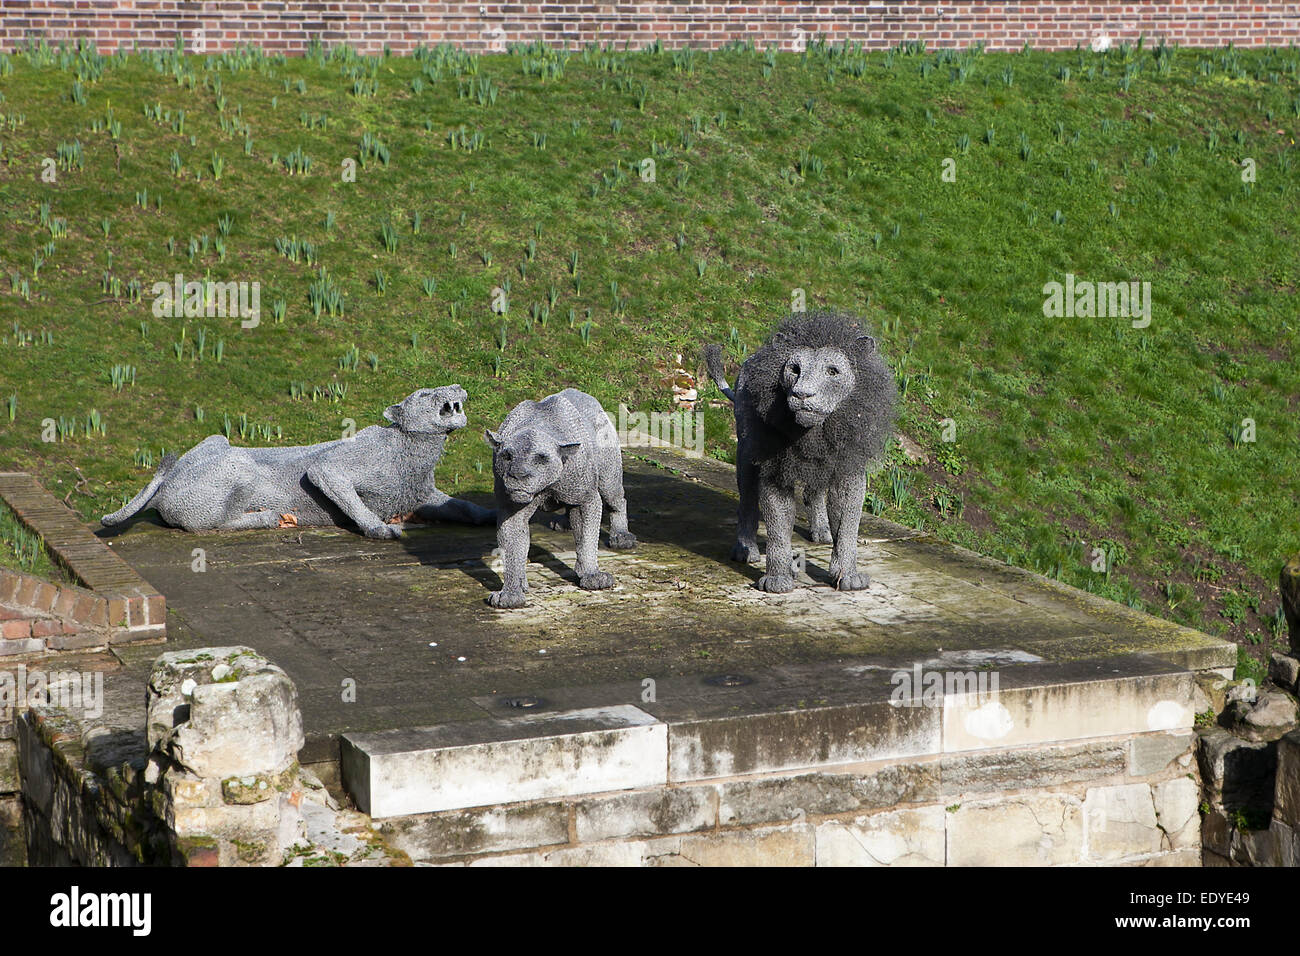 London - October 17, 2014: Lions made from wire mesh by Kendra Haste at the Tower of London Stock Photo